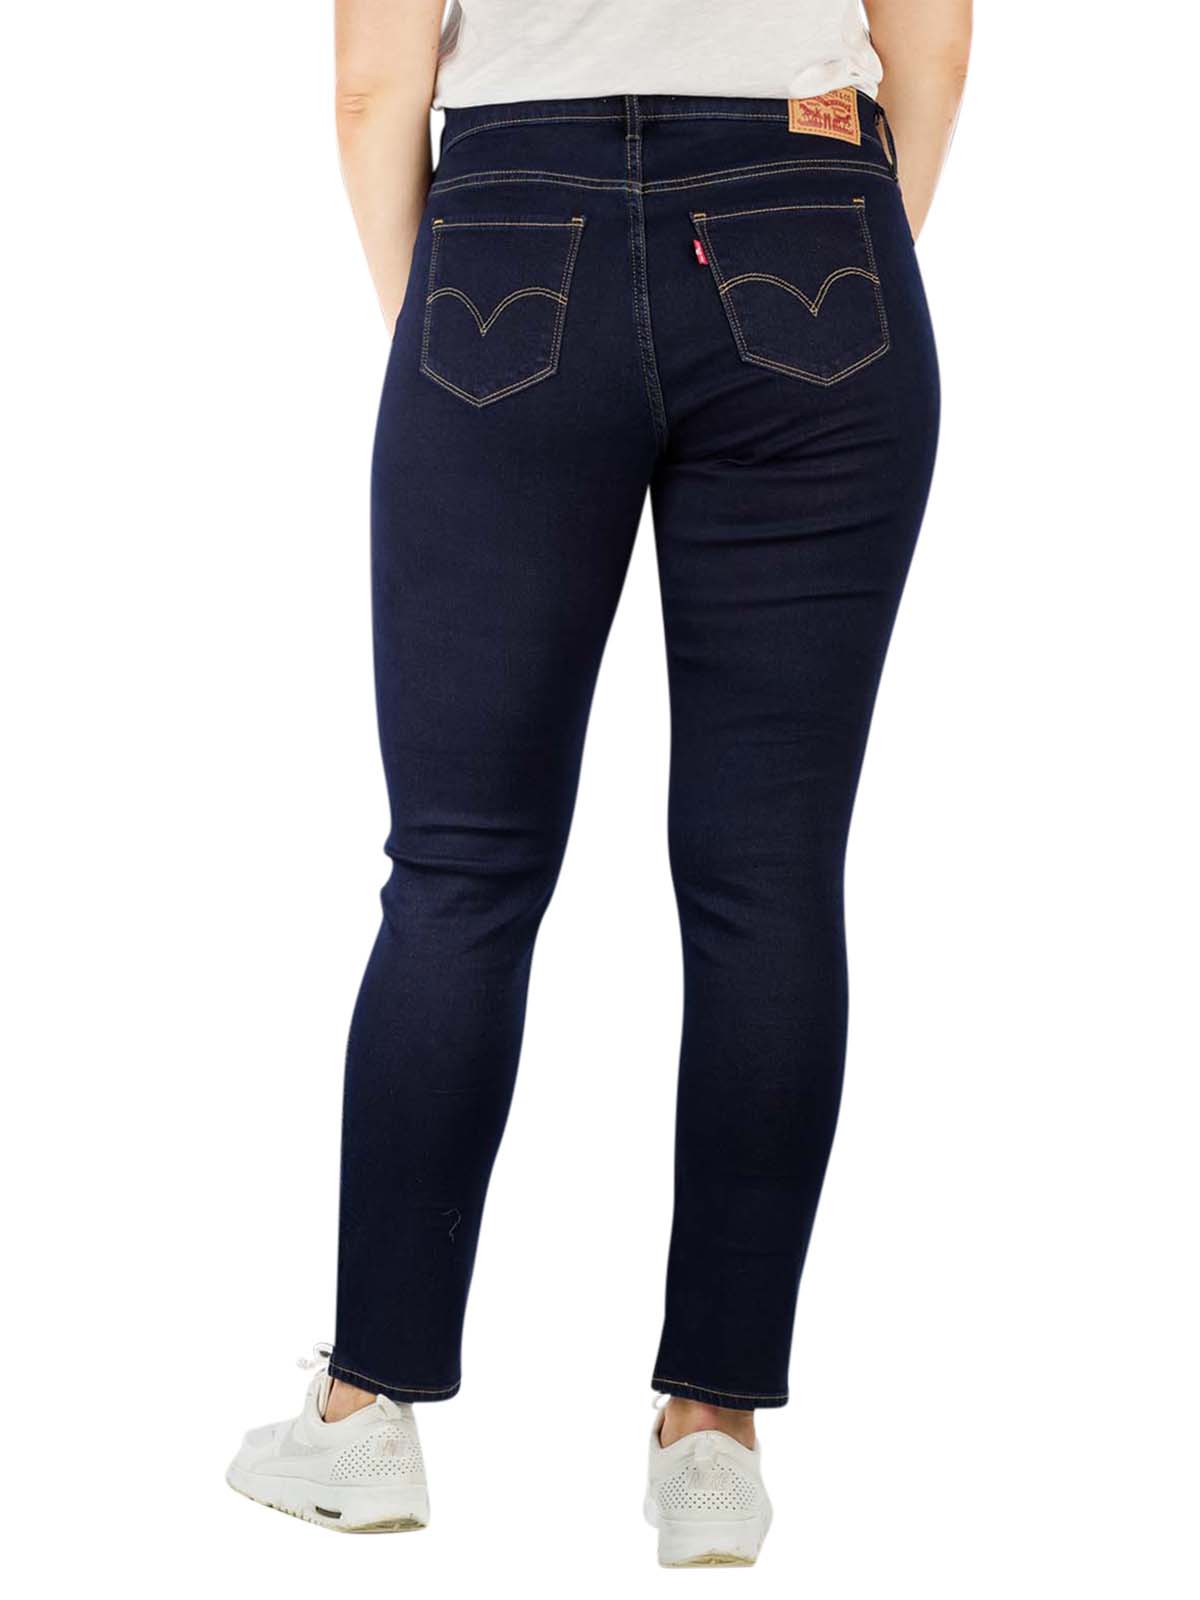 Levi's 311 Jeans Shaping Skinny Plus Size darkest sky Levi's Women's Jeans  | Free Shipping on  - SIMPLY LOOK GOOD